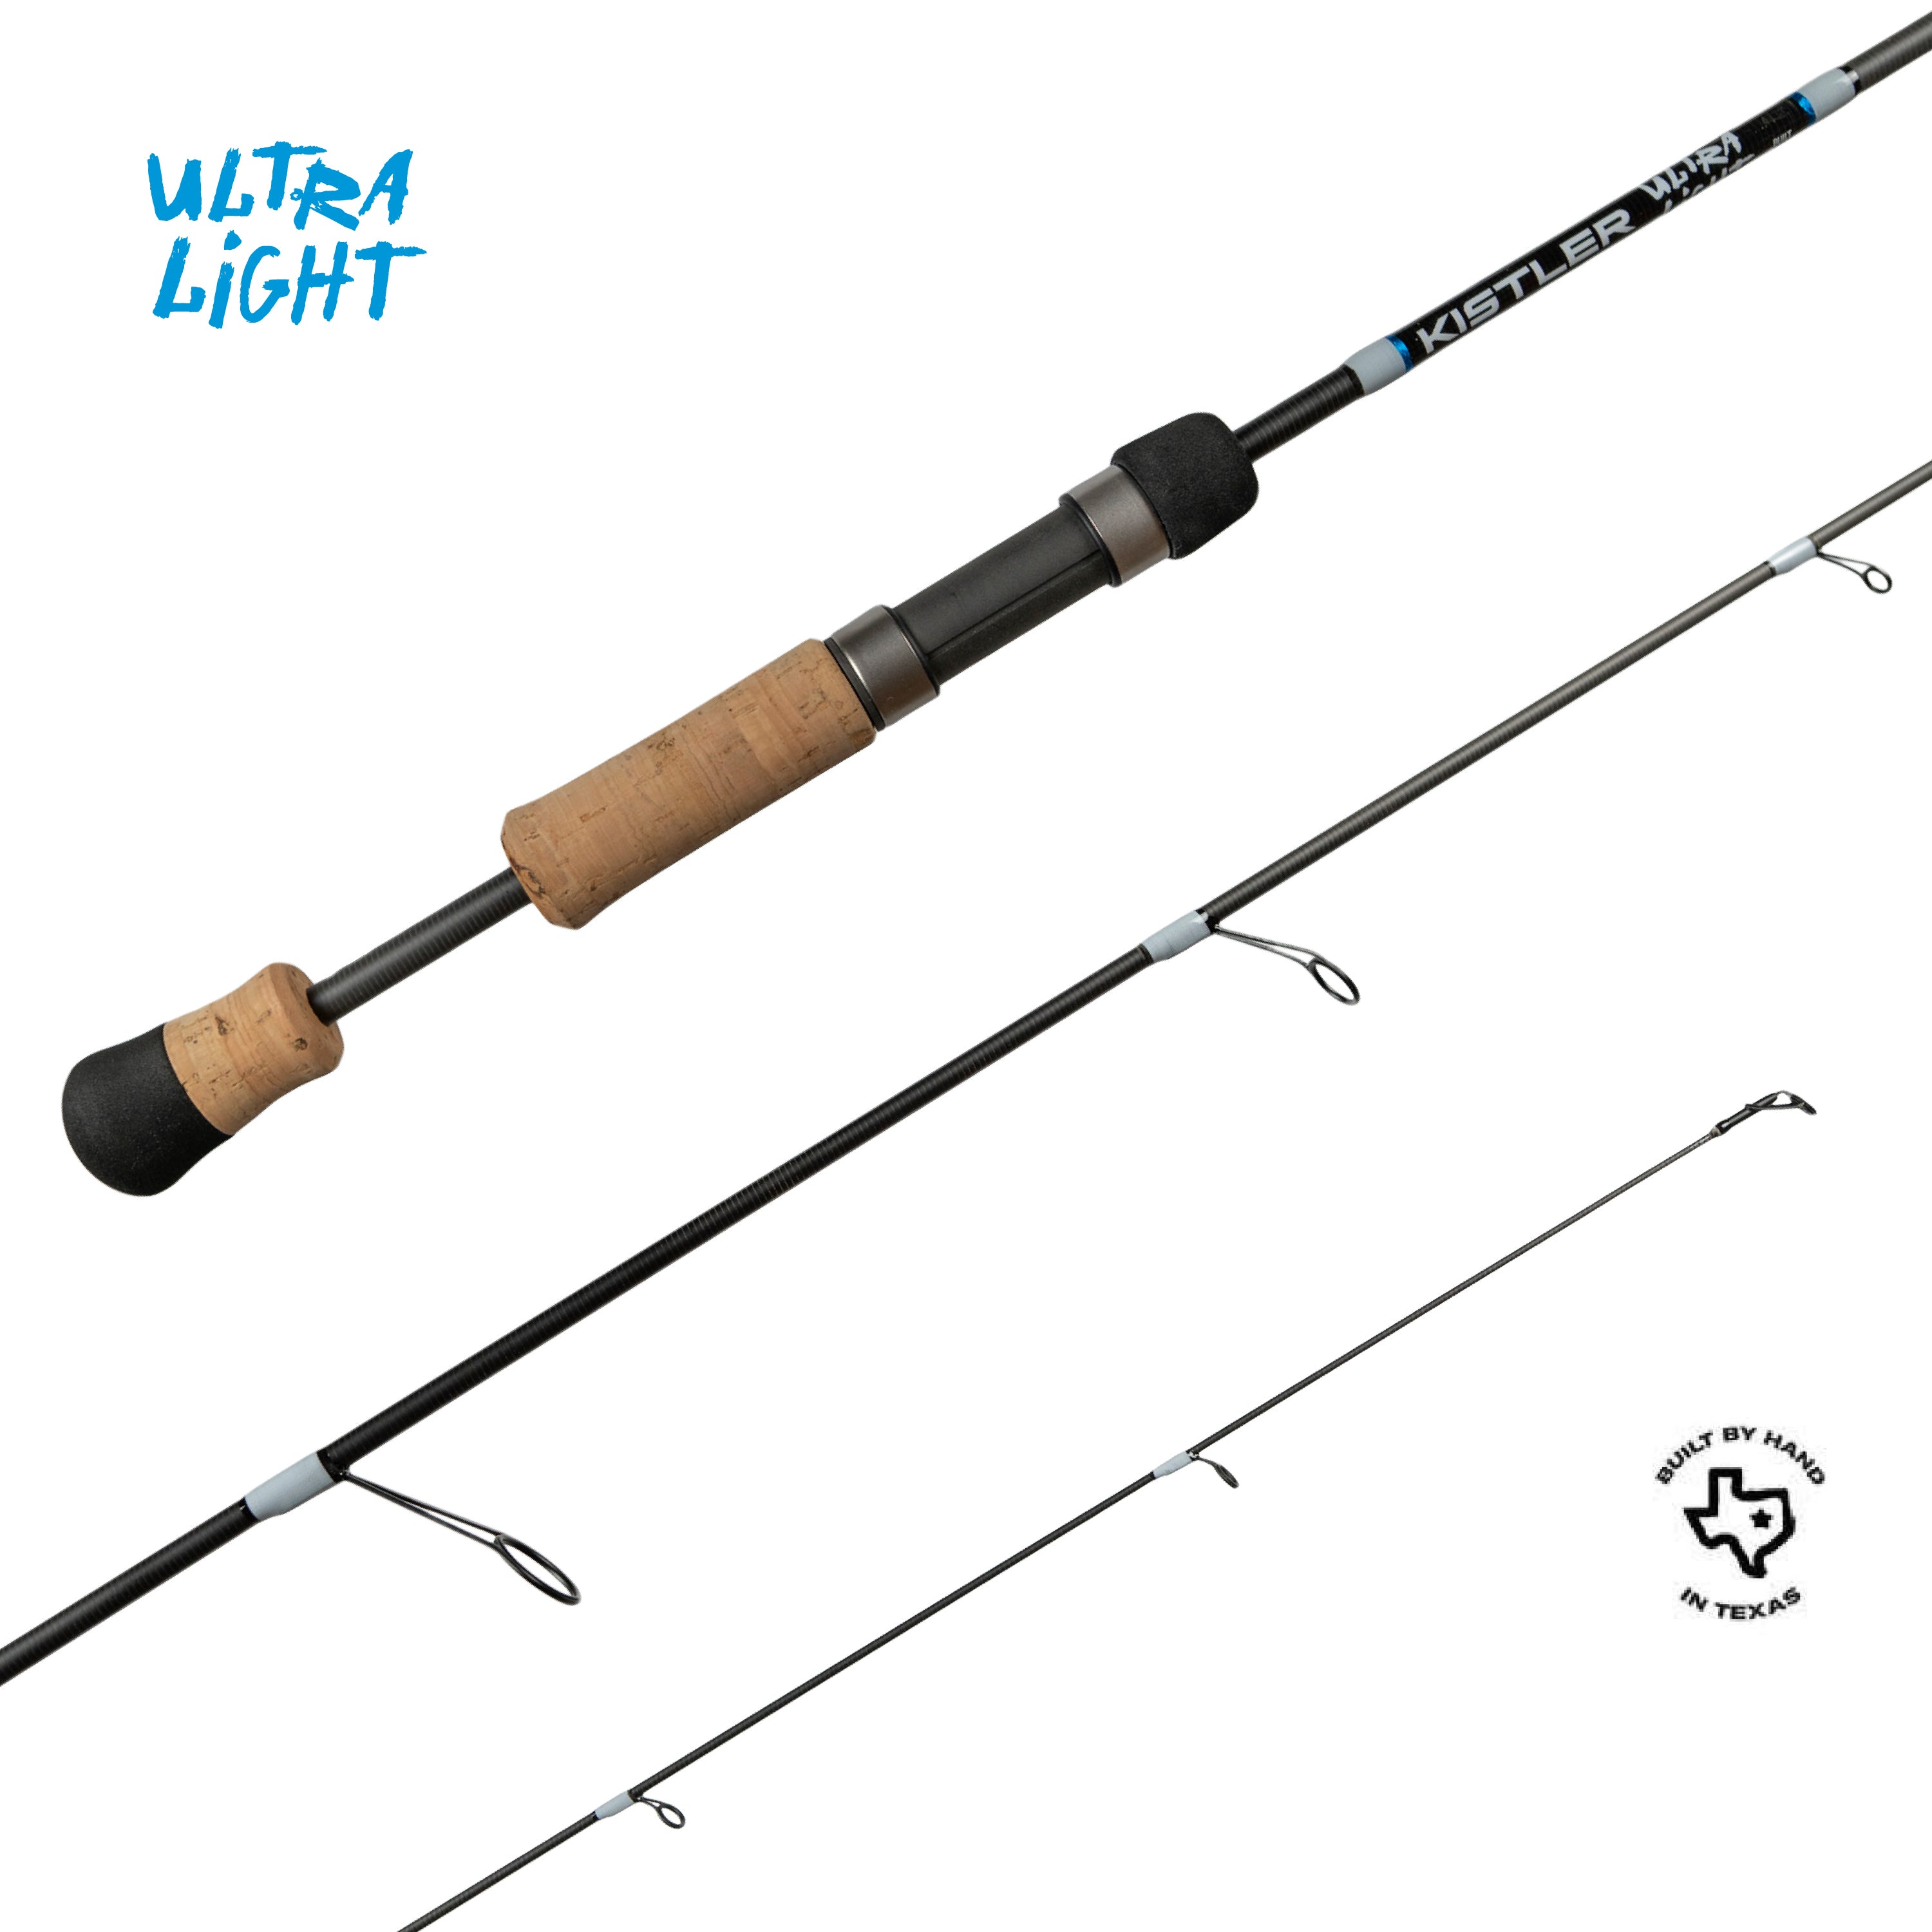 6 Foot Rod for Saltwater